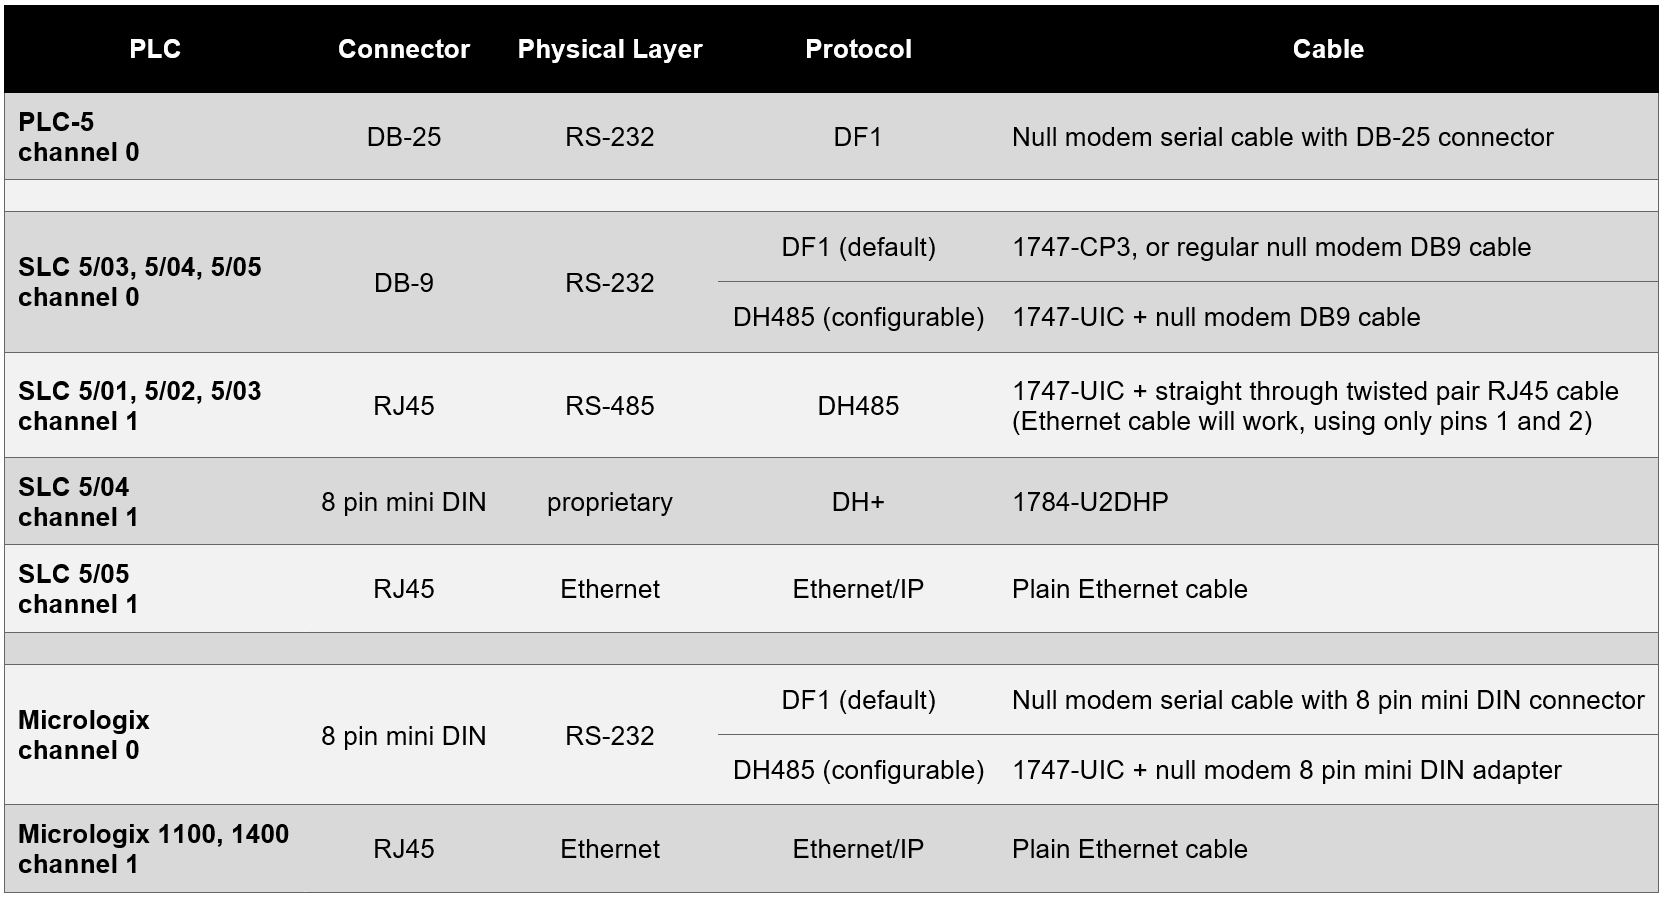 Table of Allen-Bradley PLC Cables and Protocols